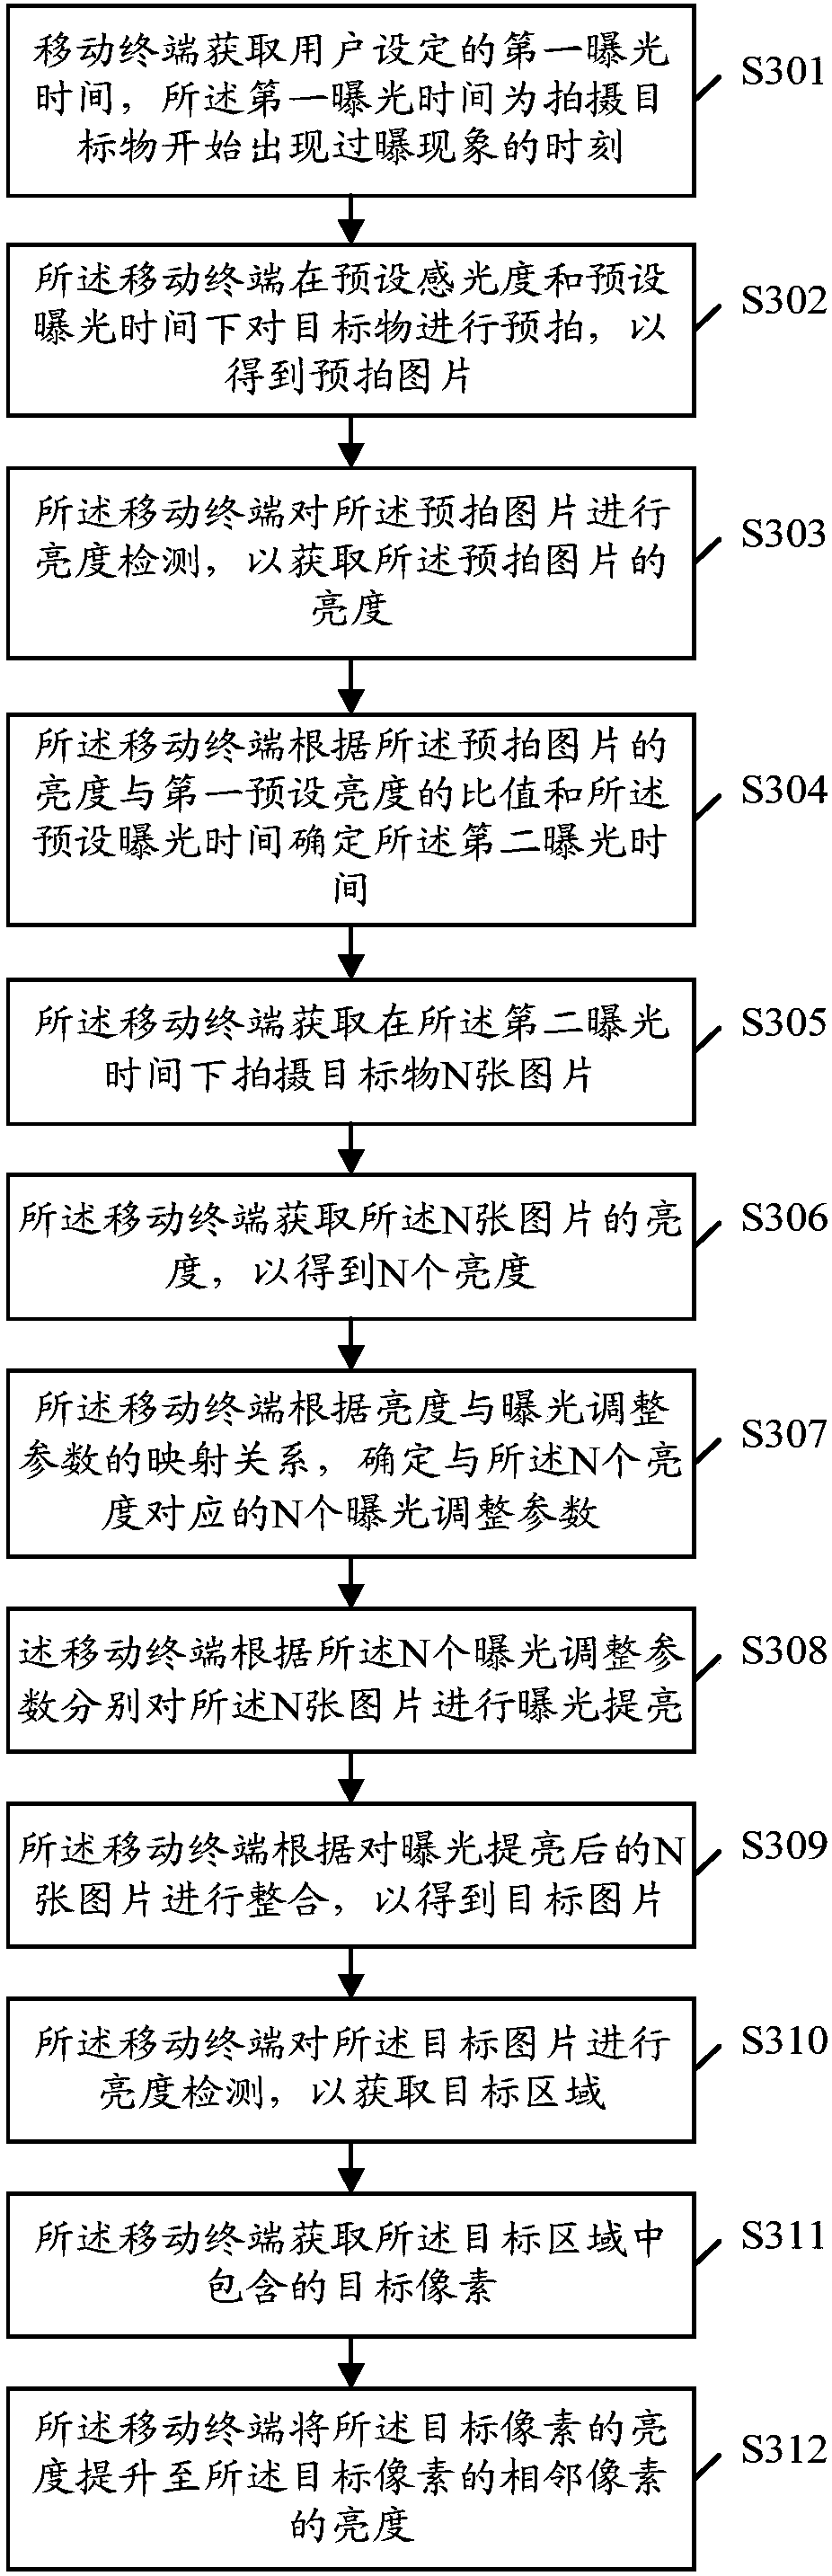 Image processing method, mobile terminal and related medium product